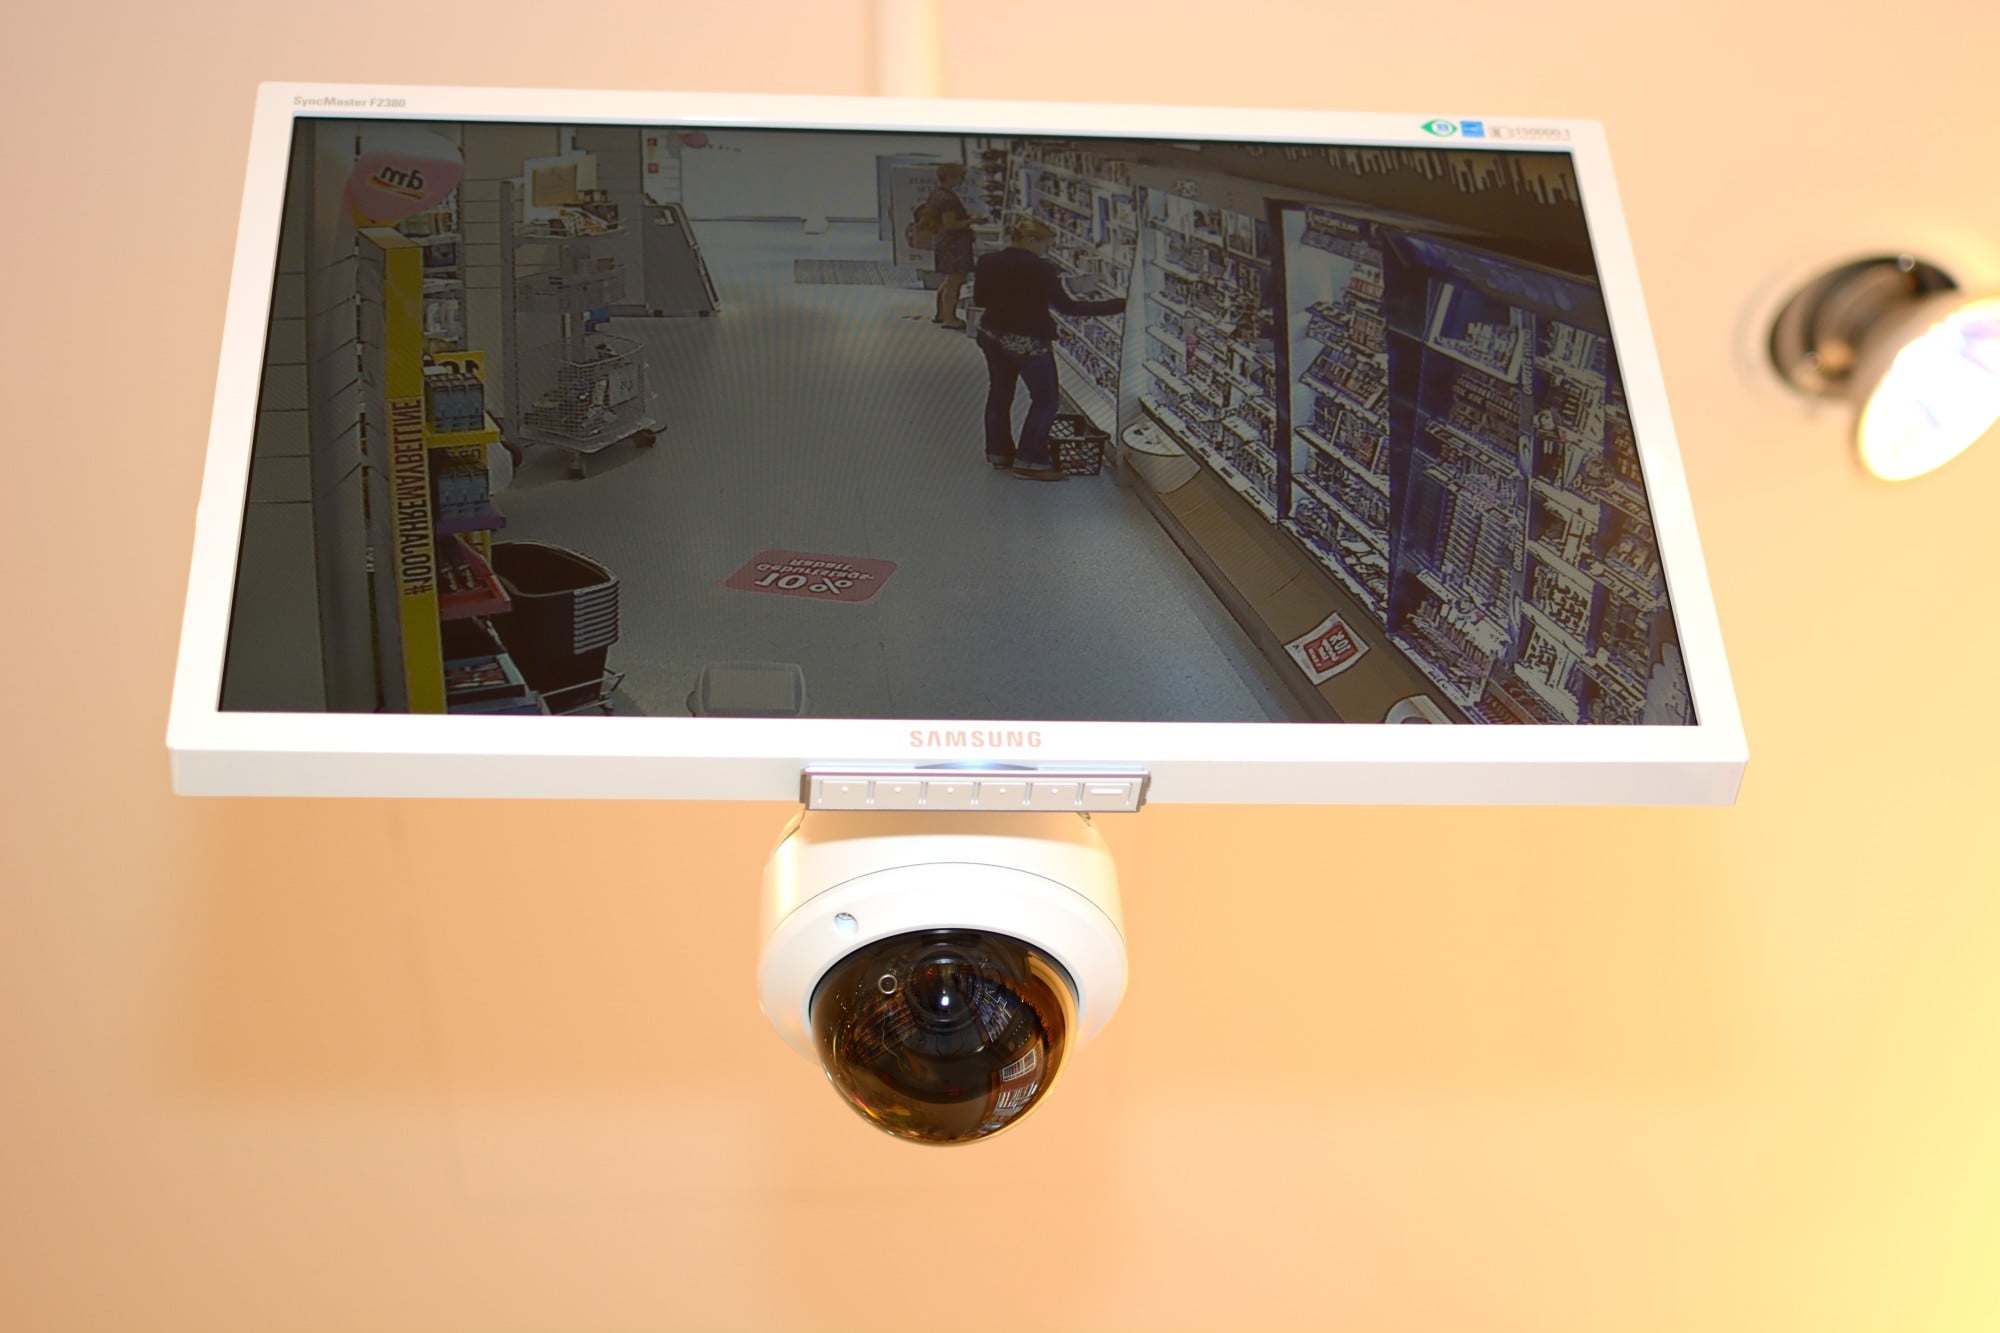 11 Best Security Cameras For Businesses